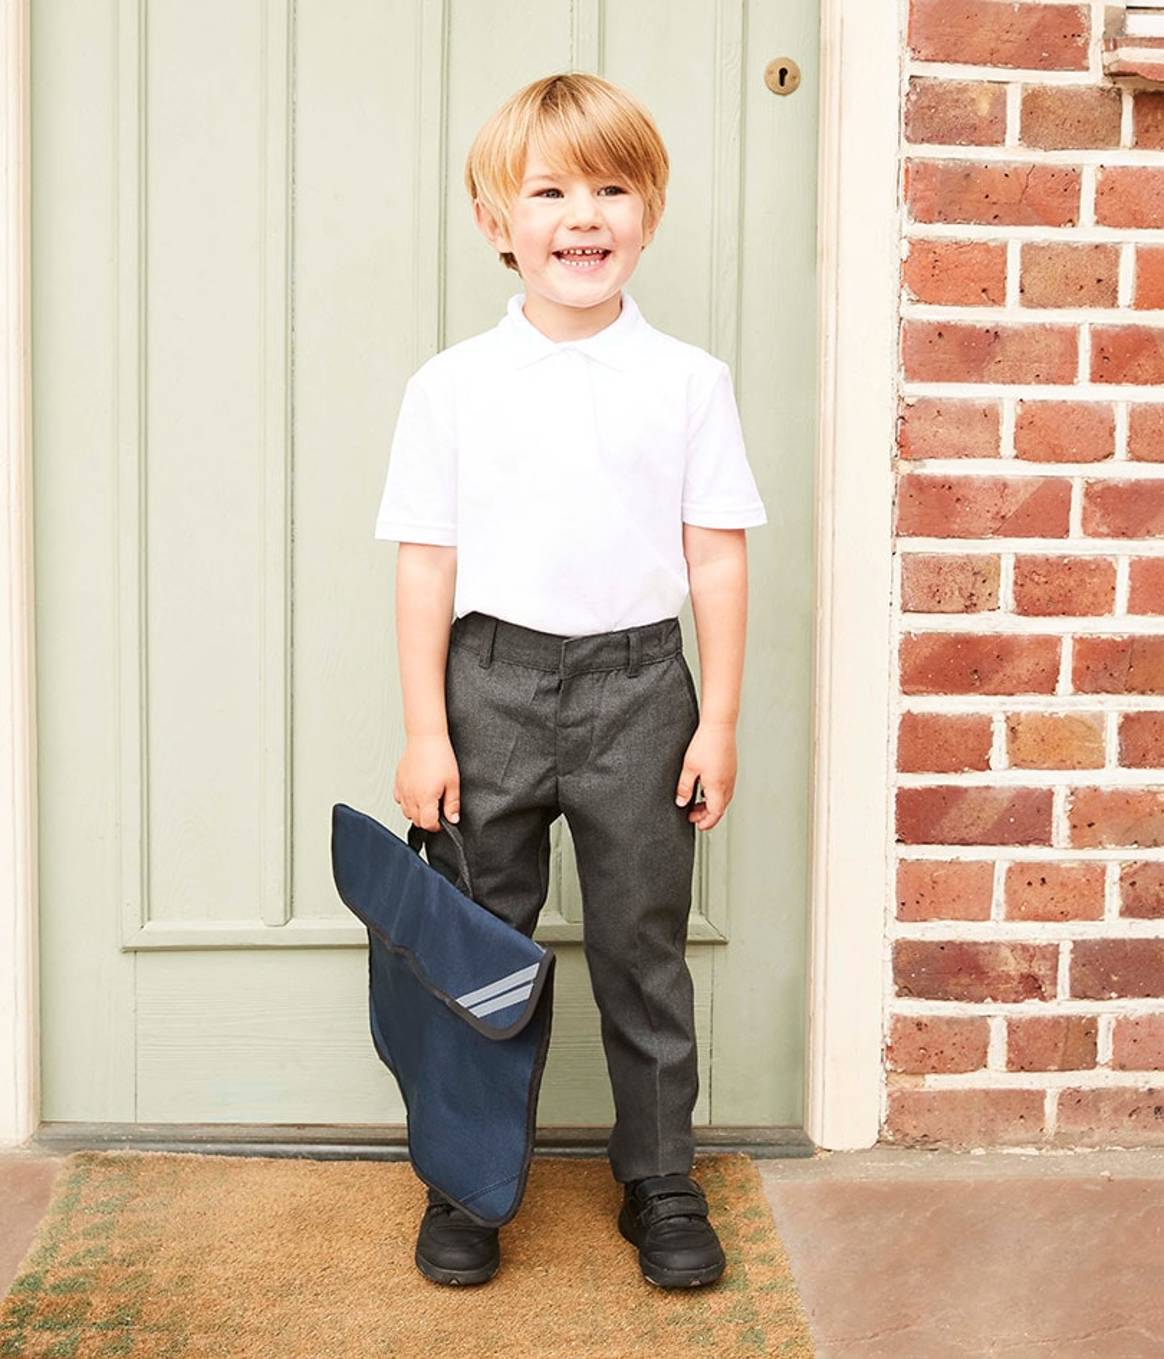 PARENTS PAY SAME PRICE FOR UNIFORMS NO MATTER THE AGE WITH MORRISONS NEW BACK TO SCHOOL RANGE